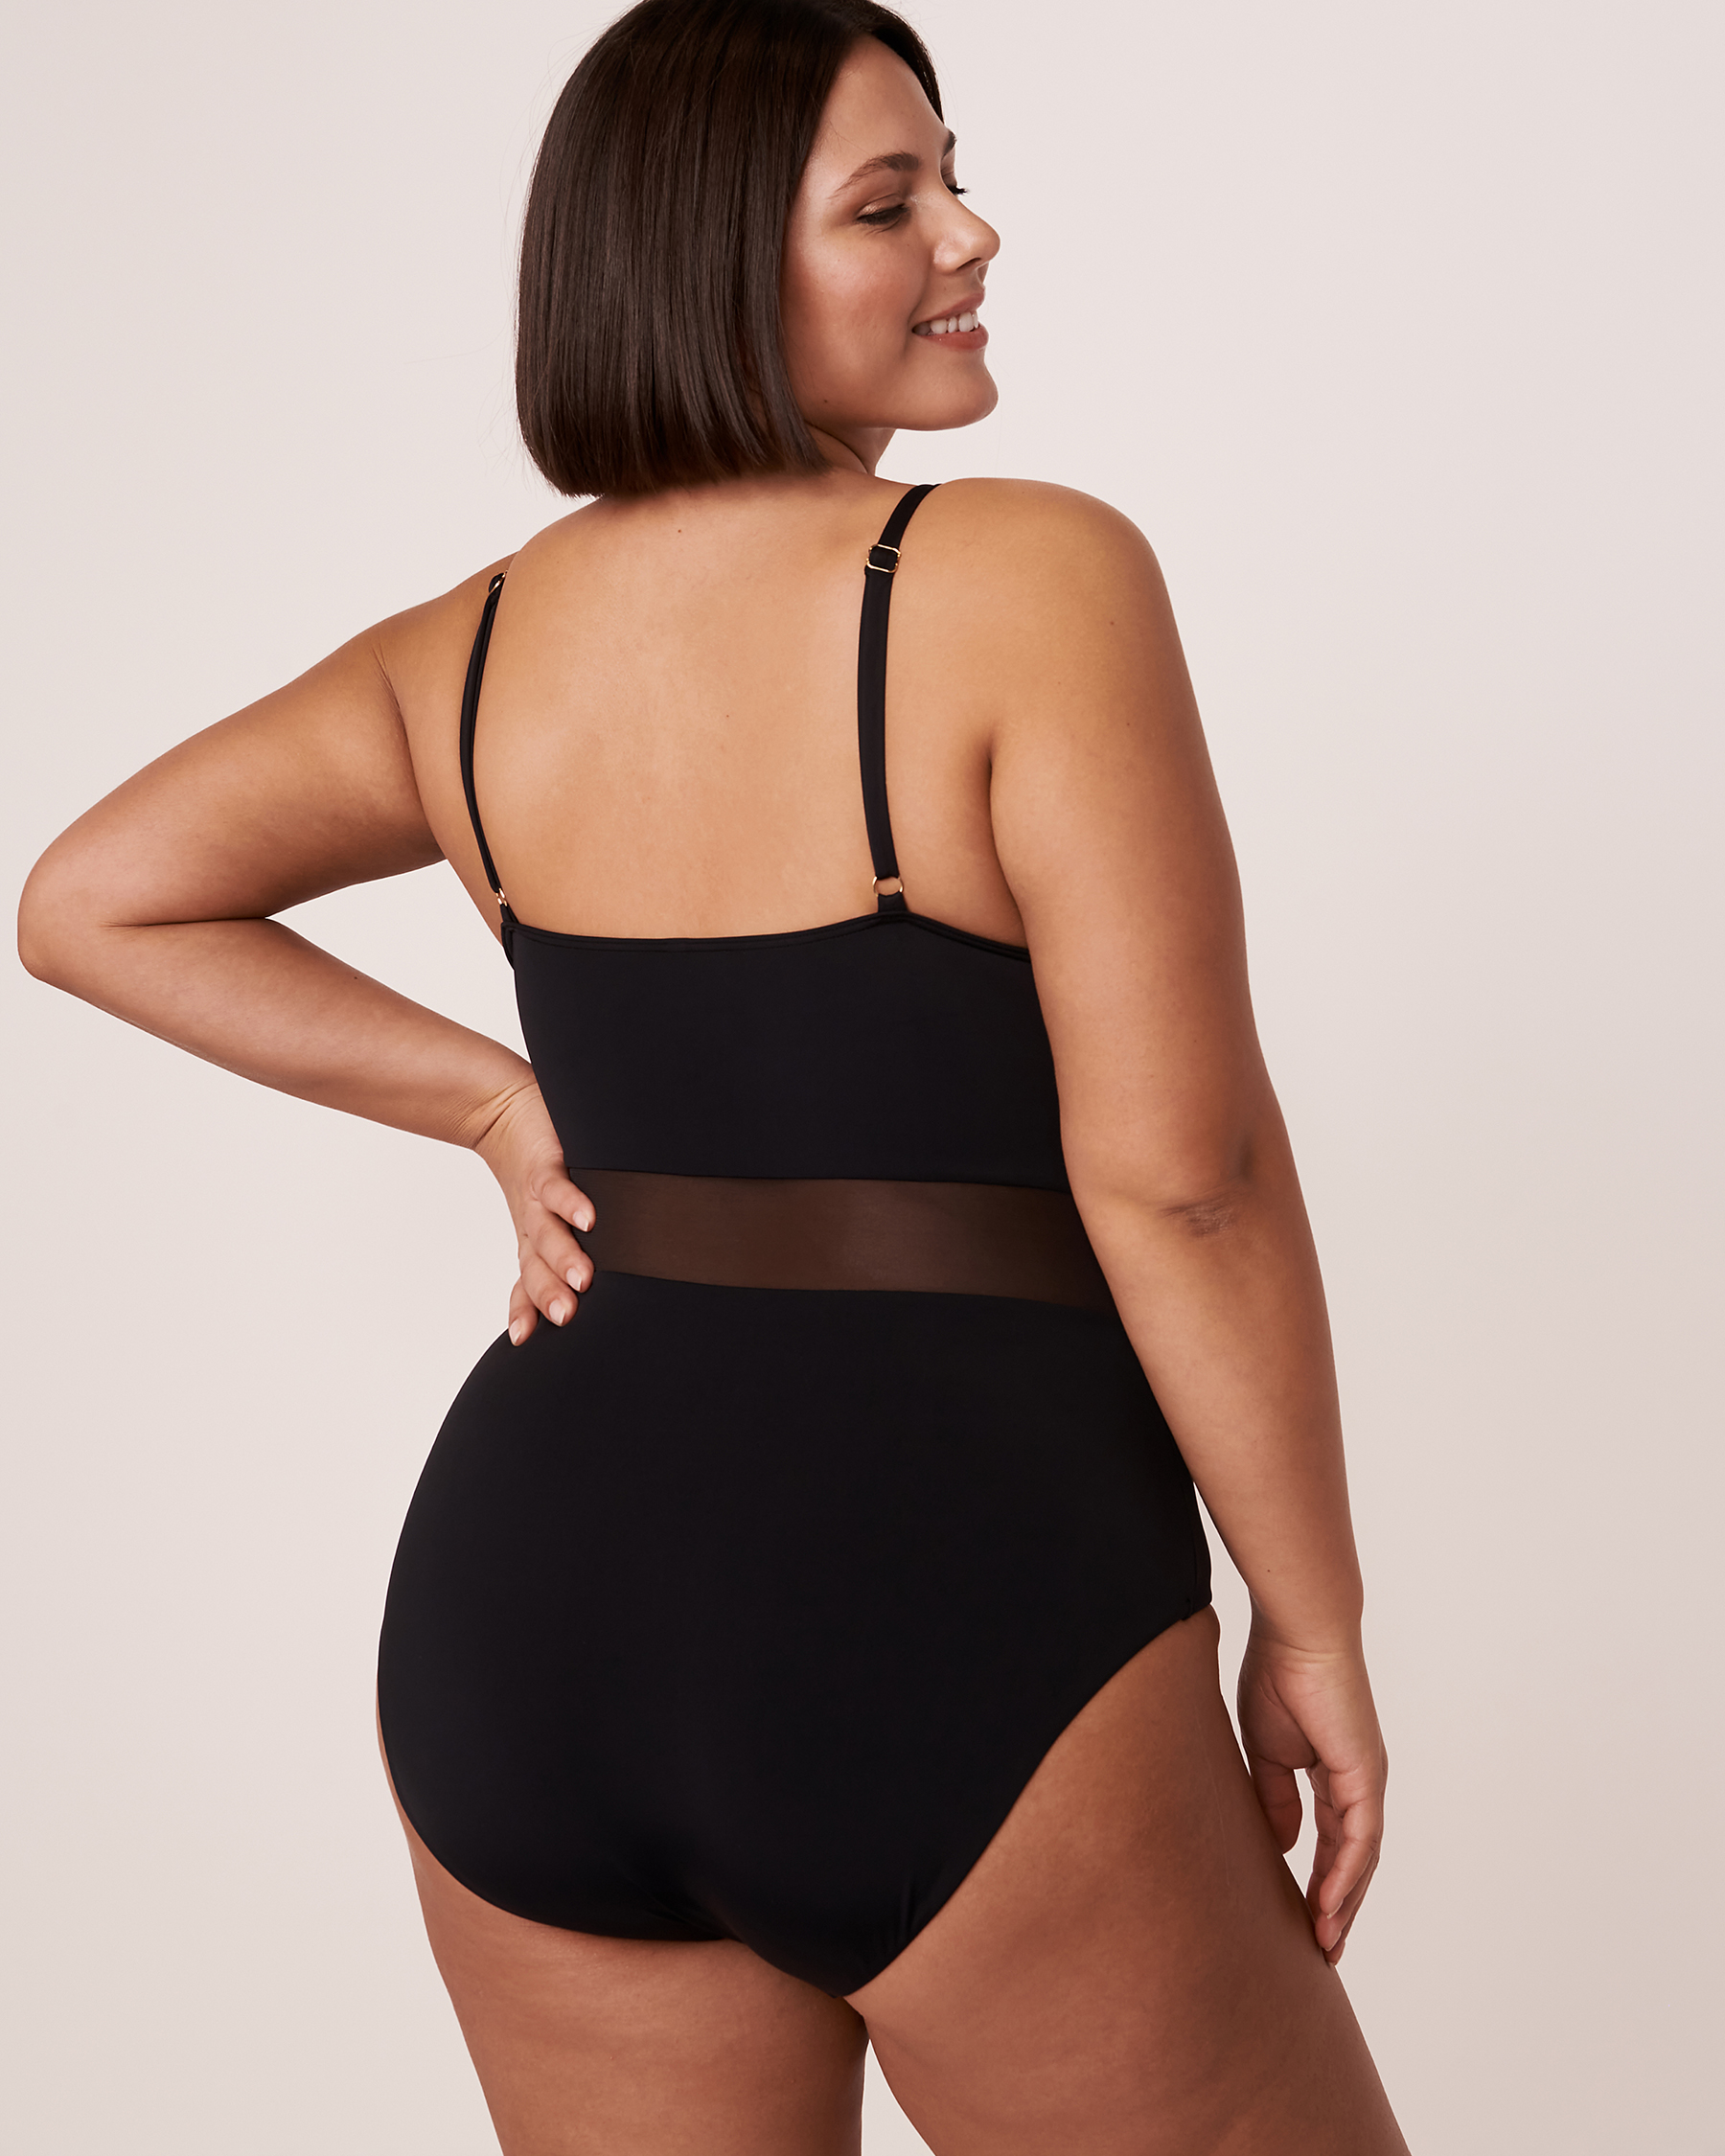 KYLIE Mesh Inserts One-piece Swimsuit - Black